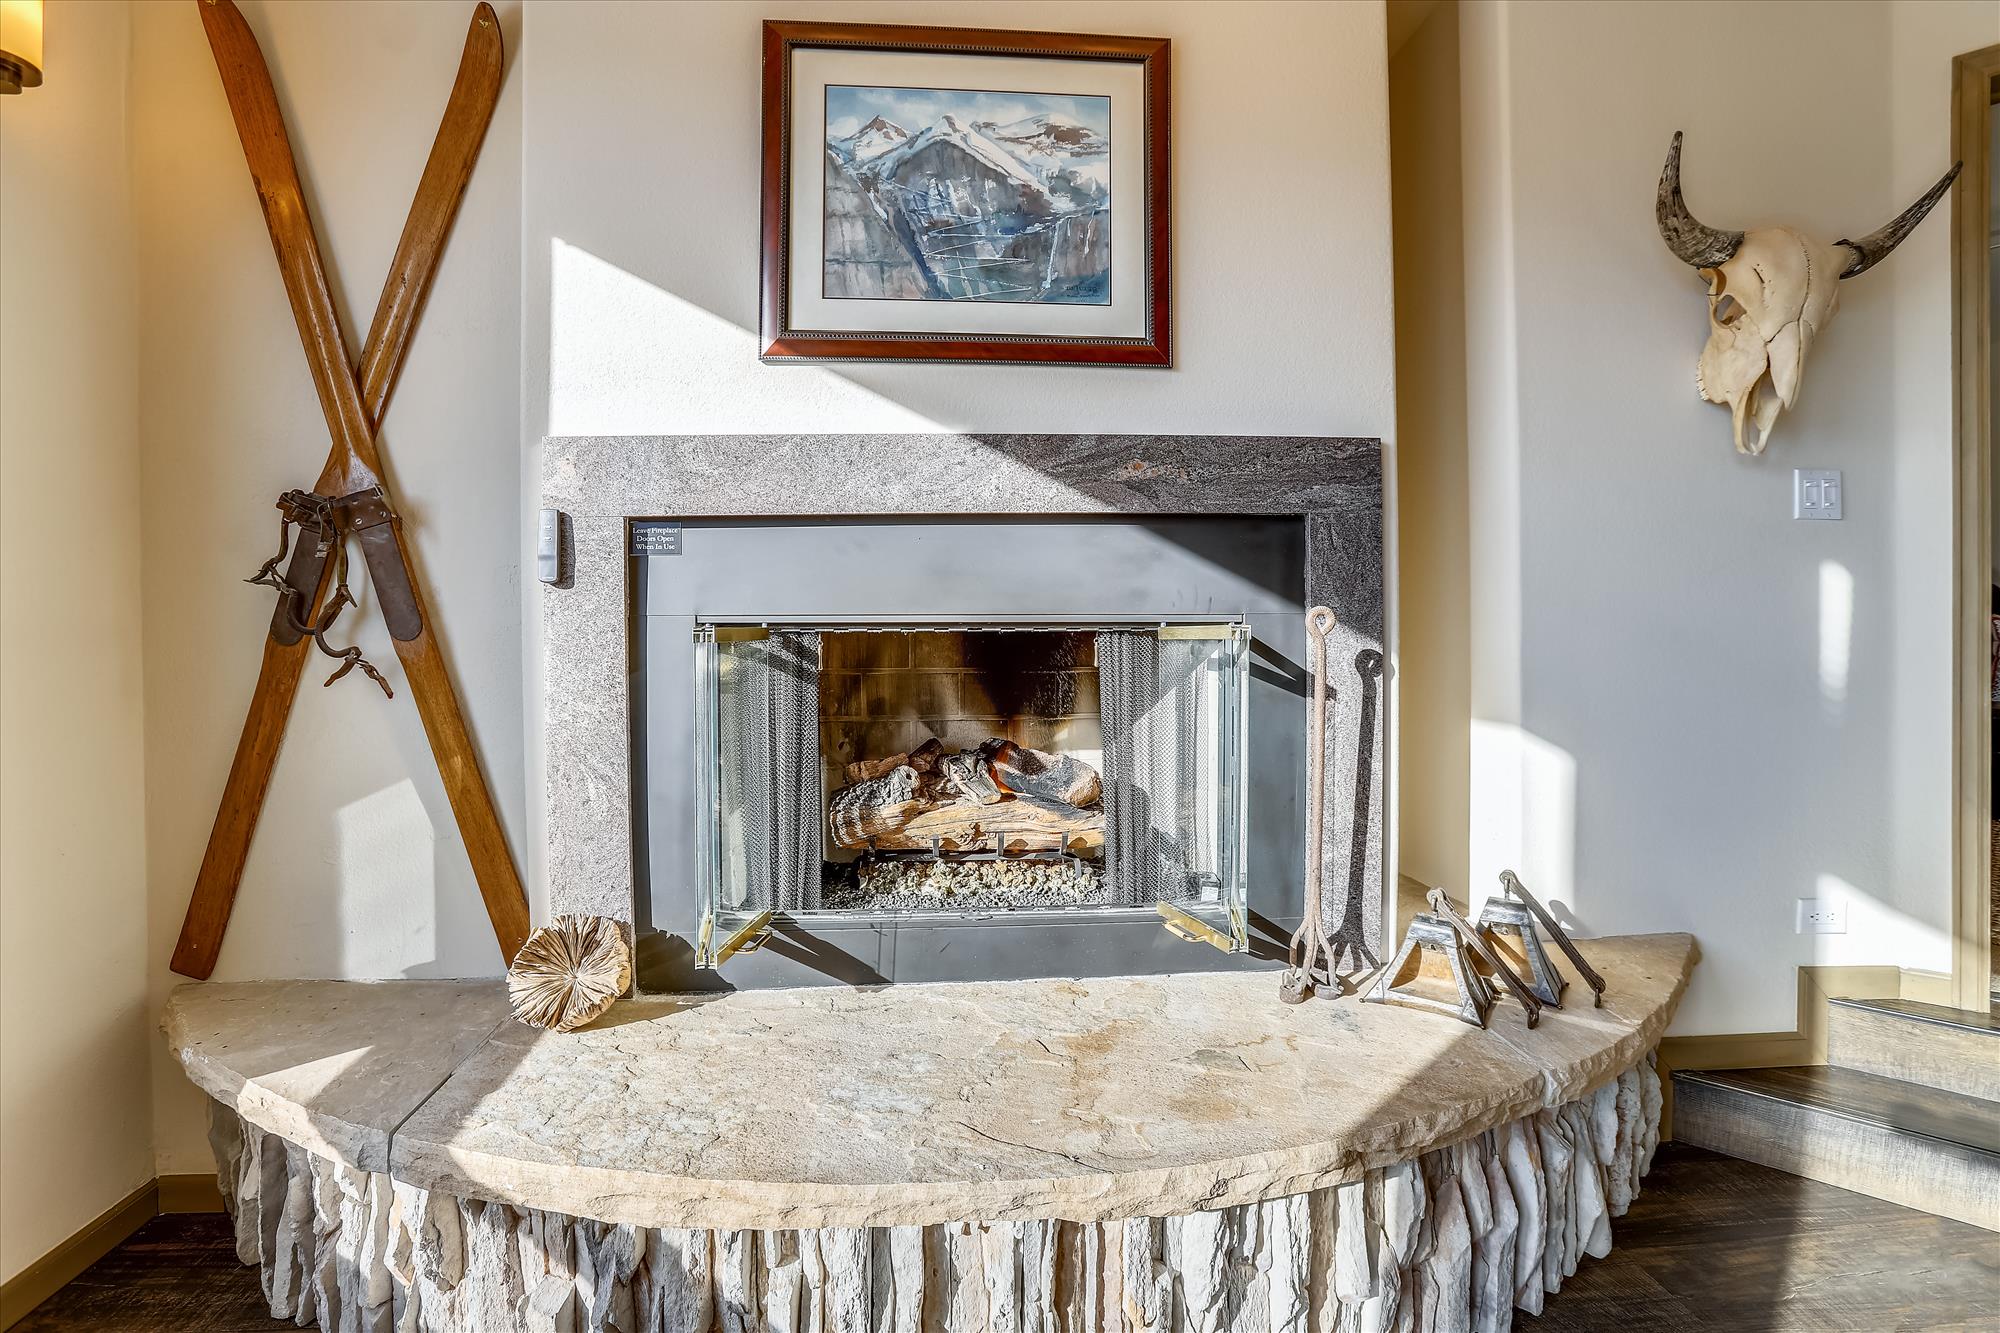 Beautiful gas fireplace to help you warm up after a long day on the slopes.